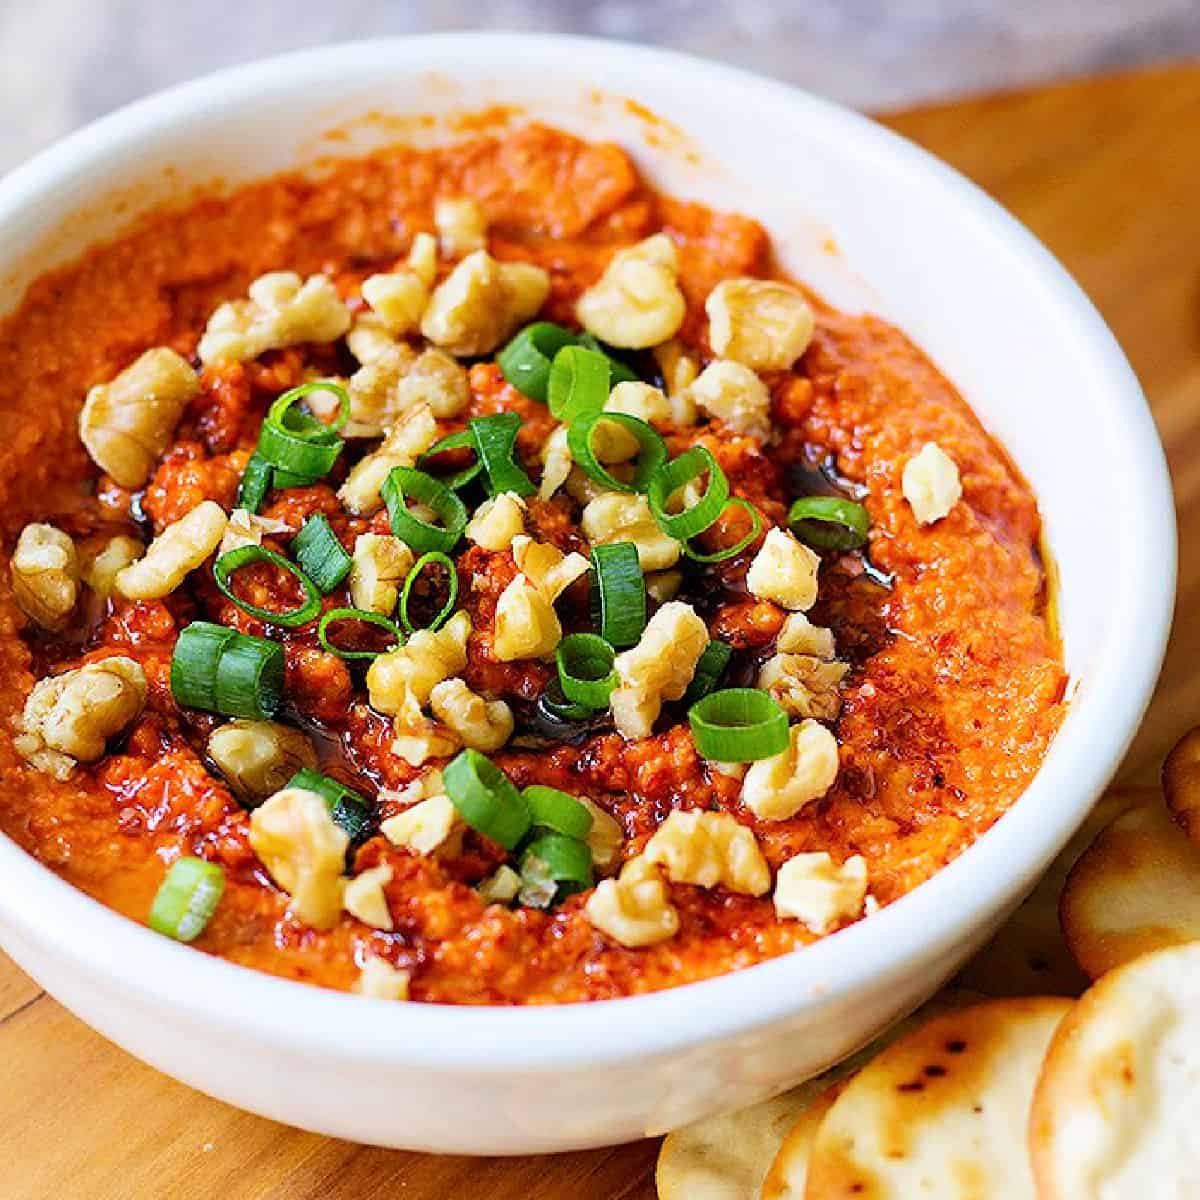 Muhammara is a tasty roasted red pepper dip from Aleppo, Syria. This classic Muhammara recipe is made with roasted red peppers, walnuts and olive oil.